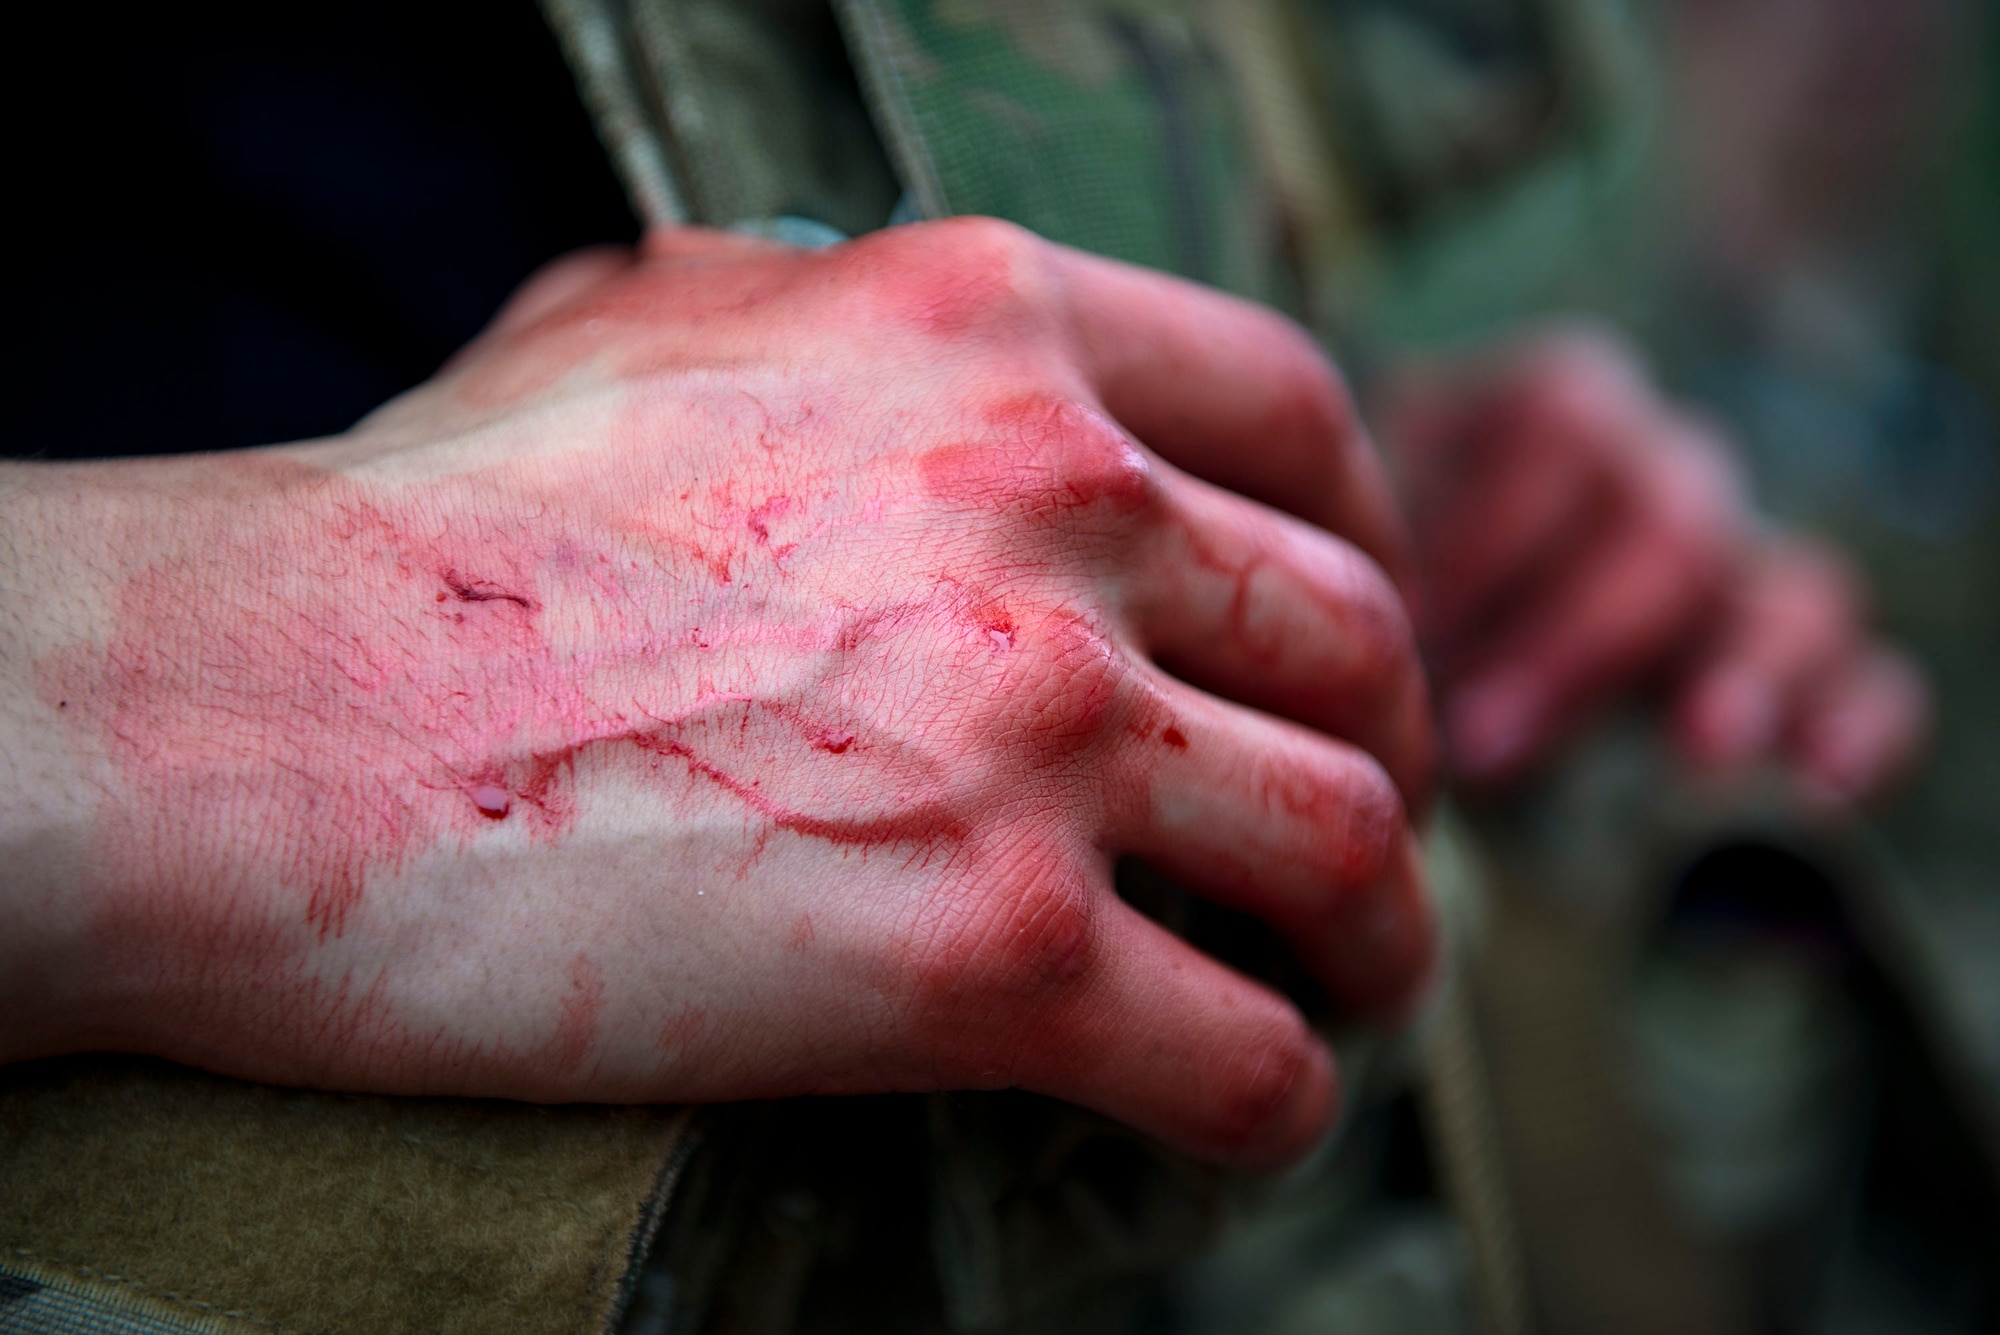 Fake blood rests on the hands of Airman 1st Class Andruw Reyes, 23d Maintenance Squadron nondestructive inspection technician, during a Tactical Combat Casualty Care course, Feb. 14, 2018, at Moody Air Force Base, Ga. The training is designed to teach Airmen how to apply critical life-saving skills while engaged in a combat environment. (U.S. Air Force photo by Airman 1st Class Erick Requadt)